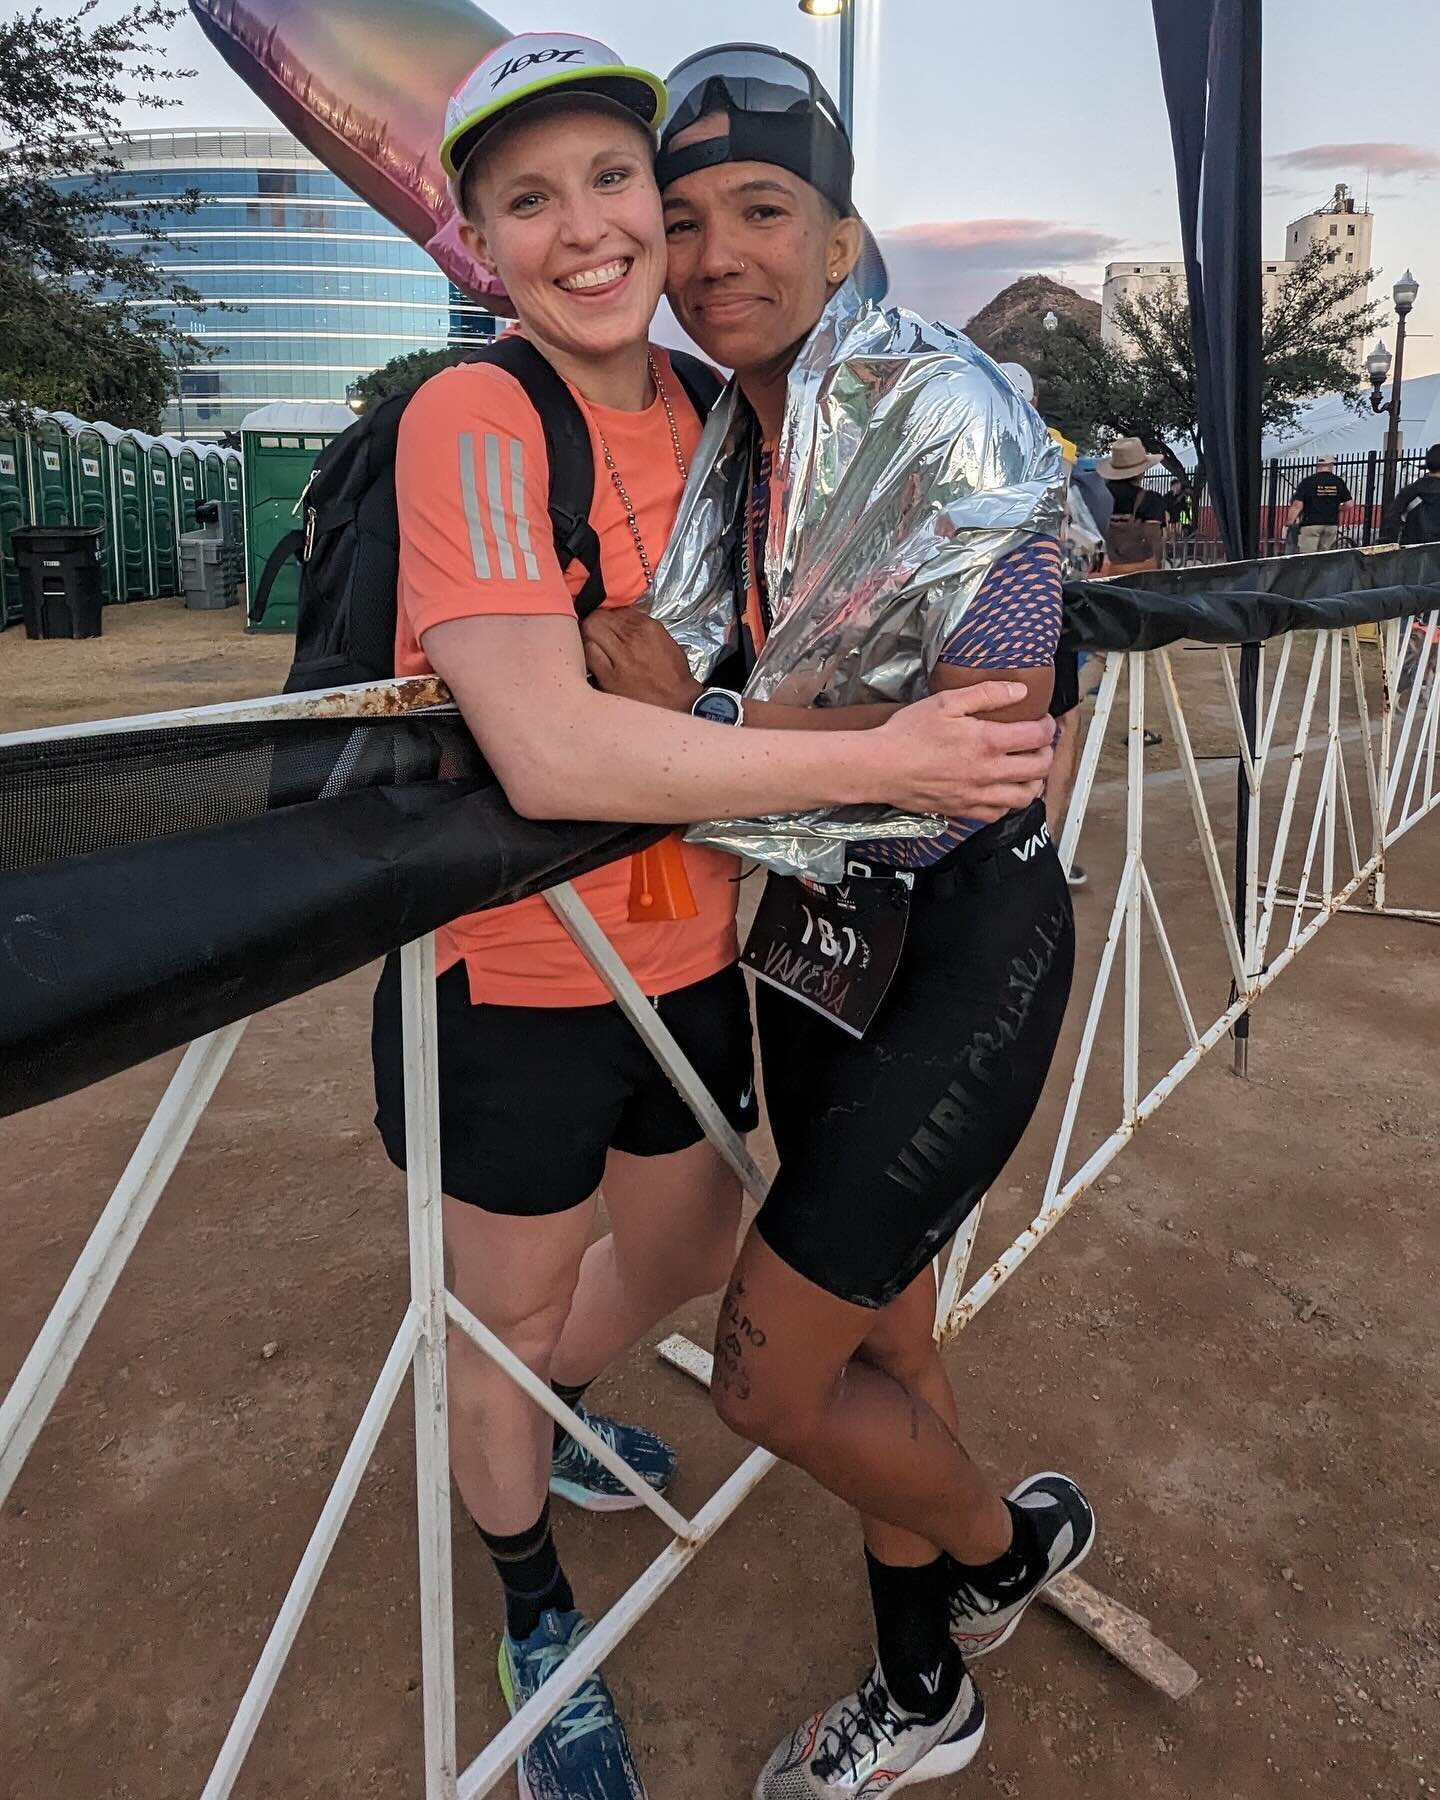 There&rsquo;s no one else I&rsquo;d rather celebrate another Ironman finish with by driving from Phoenix to Sedona to the Grand Canyon to Flagstaff and back to Phoenix with than you, @kristigraydon5. 

Thanks for wiping the tears and for reminding me